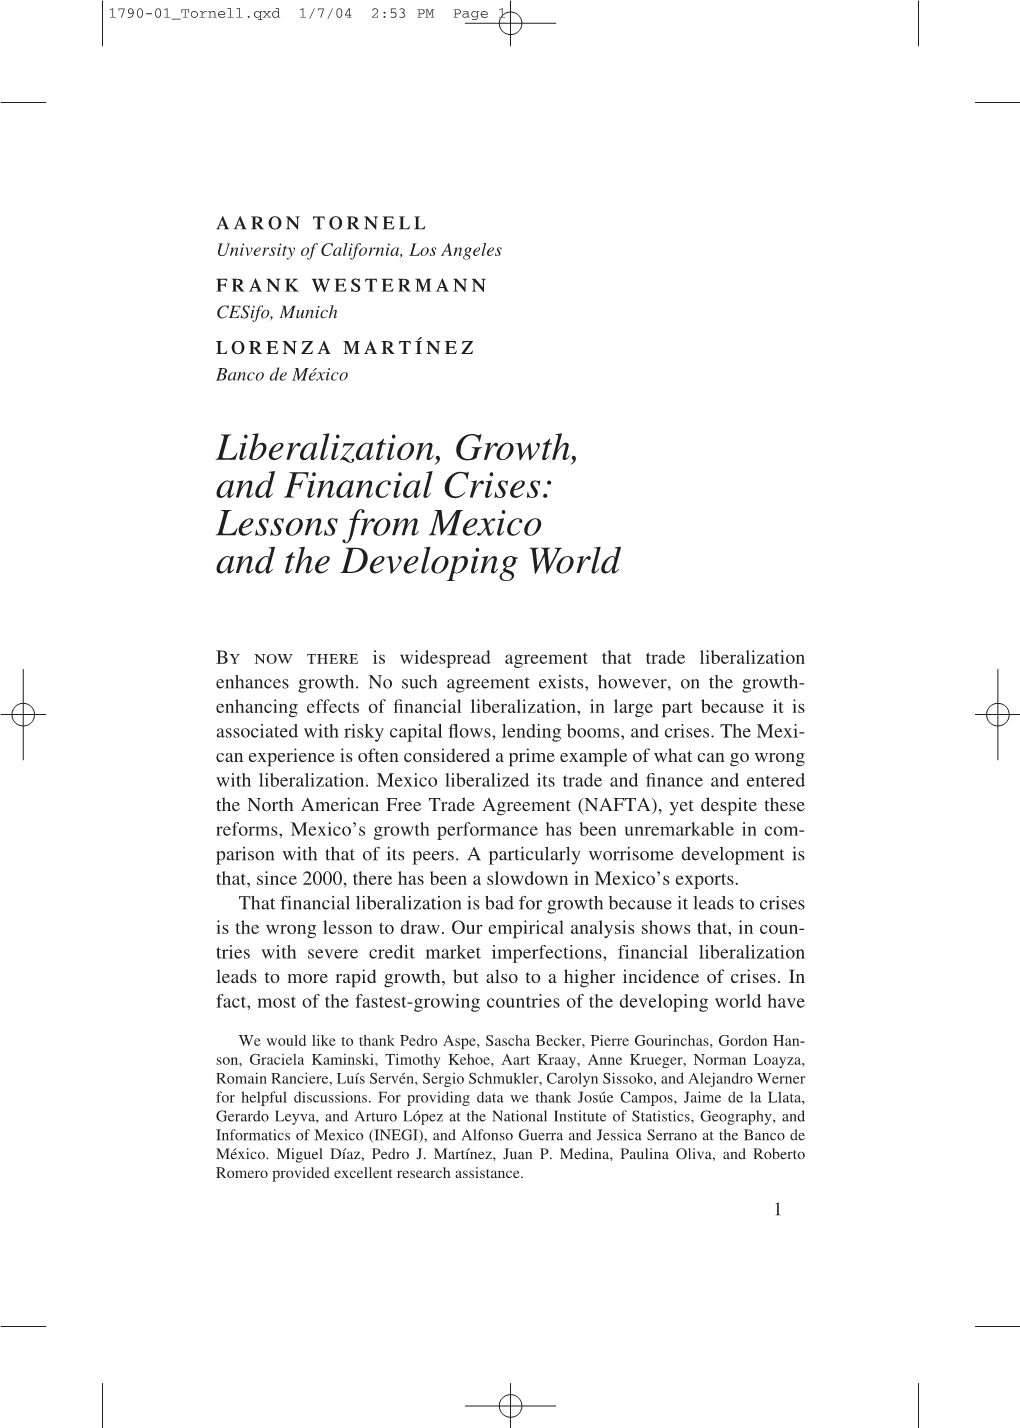 Liberalization, Growth, and Financial Crises: Lessons from Mexico and the Developing World